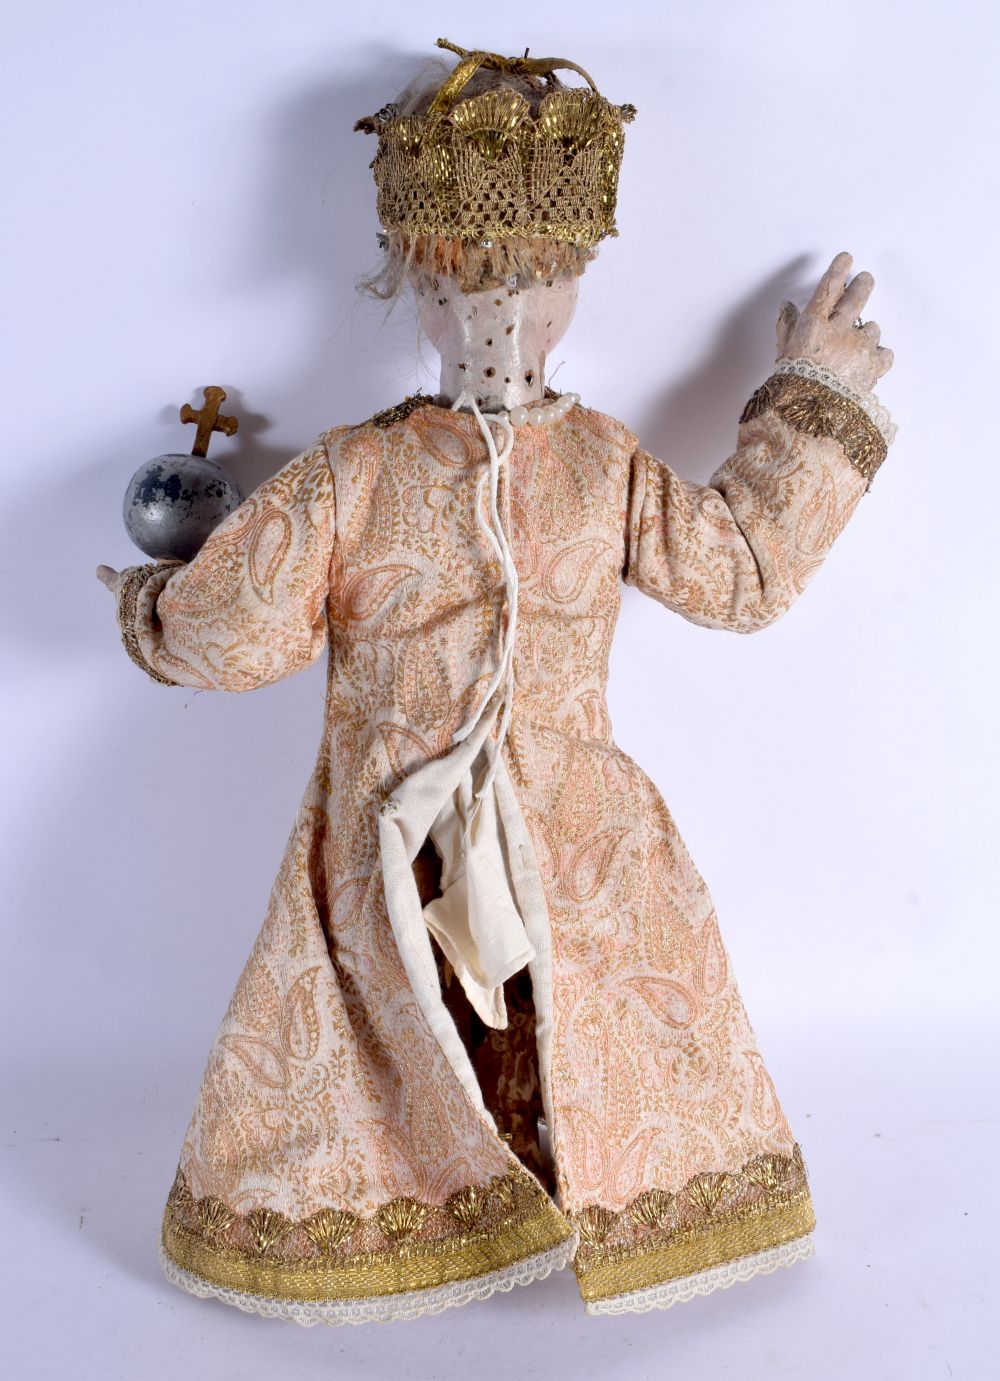 A VERY RARE 17TH/18TH CENTURY EUROPEAN CARVED AND PAINTED WOODEN DOLL modelled with one hand raised, - Image 7 of 11